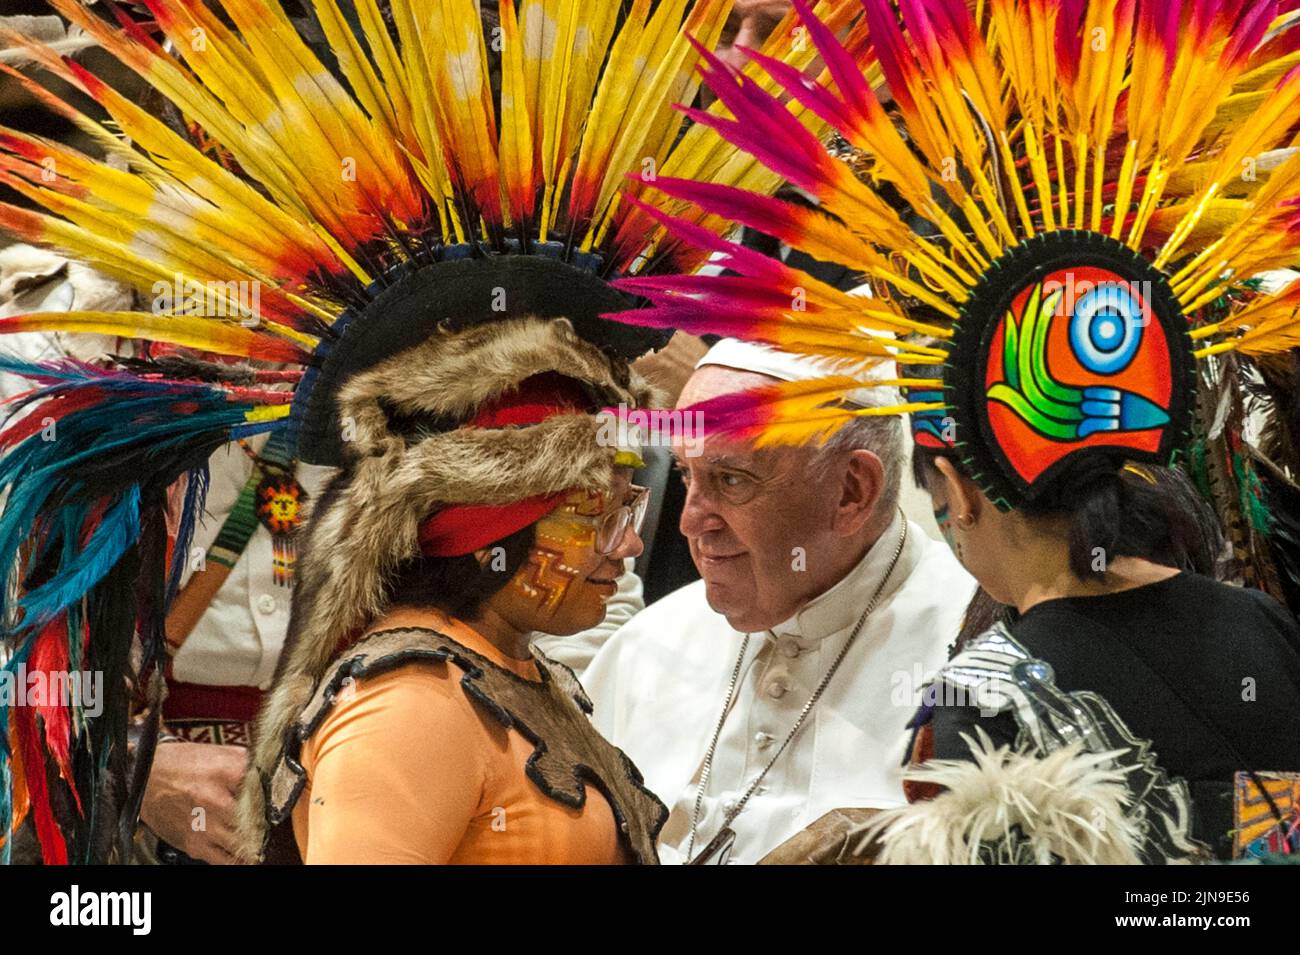 Rome, Italy. 10th Aug, 2022. Italy, Rome, Vatican, 22/08/10. Pope Francis poses for a family picture with a group of Mexican pilgrims wearing traditional clothes during the weekly general audience in the Paul VI Hall .Papa Francesco posa per una foto di famiglia con un gruppo di pellegrini messicani in abiti tradizionali durante l'udienza generale settimanale nell'Aula Paolo VI. Photo by Massimiliano MIGLIORATO/Catholic Press Photo Credit: Independent Photo Agency/Alamy Live News Stock Photo